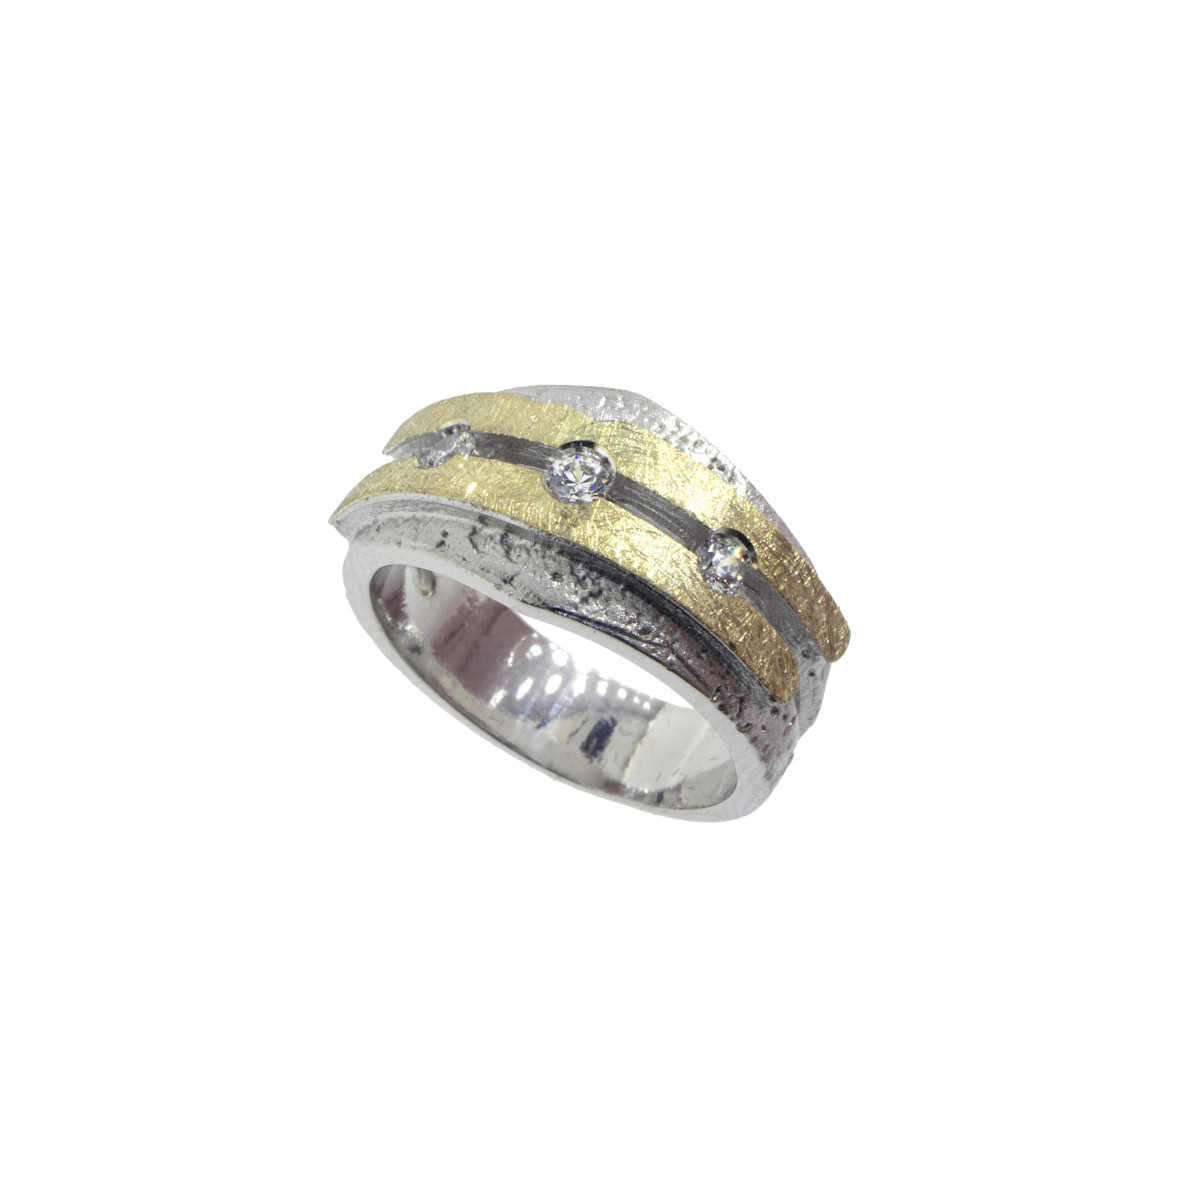 RING IN SILVER, GOLD, TWO BRILLIANT 0.04 CT AND ONE 0.05 CT